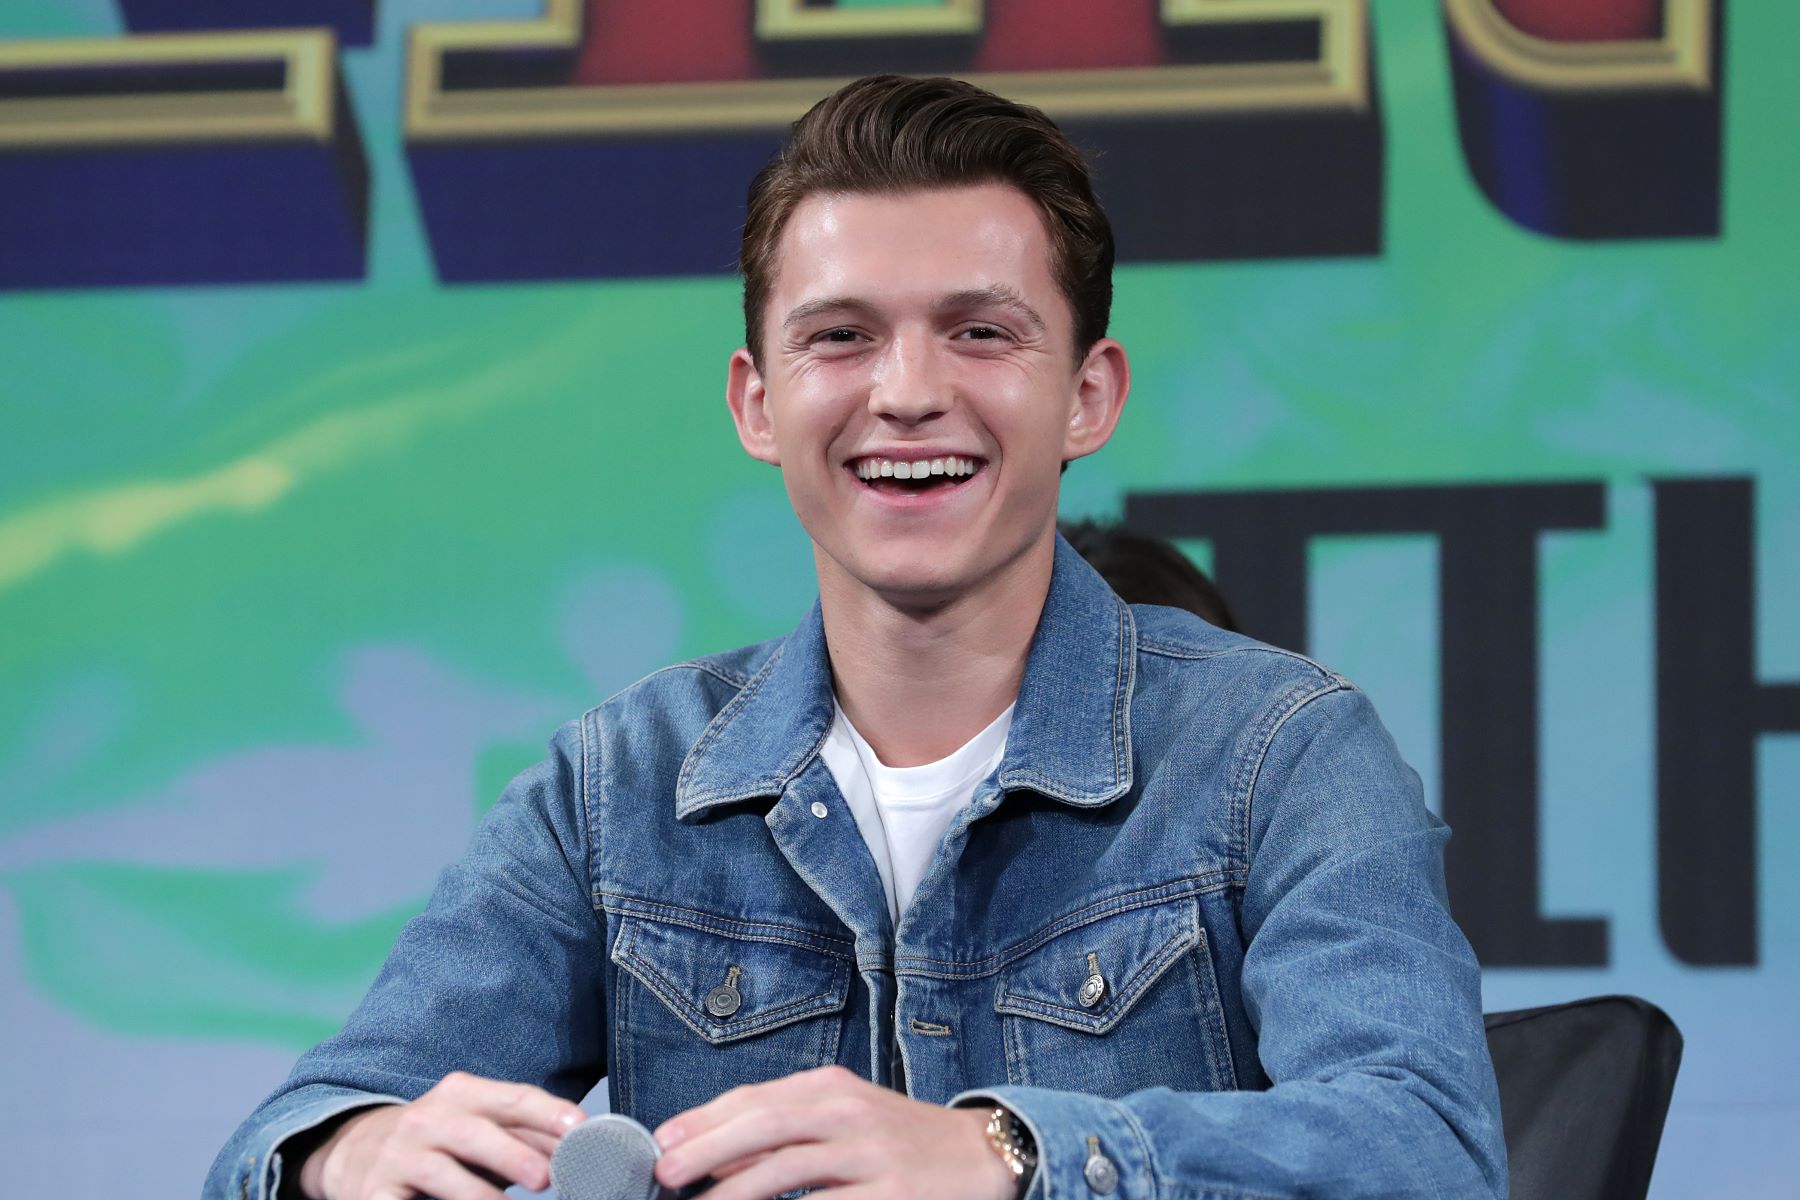 Tom Holland attending a press conference for 'Spider-Man: Far From Home' in Seoul, South Korea